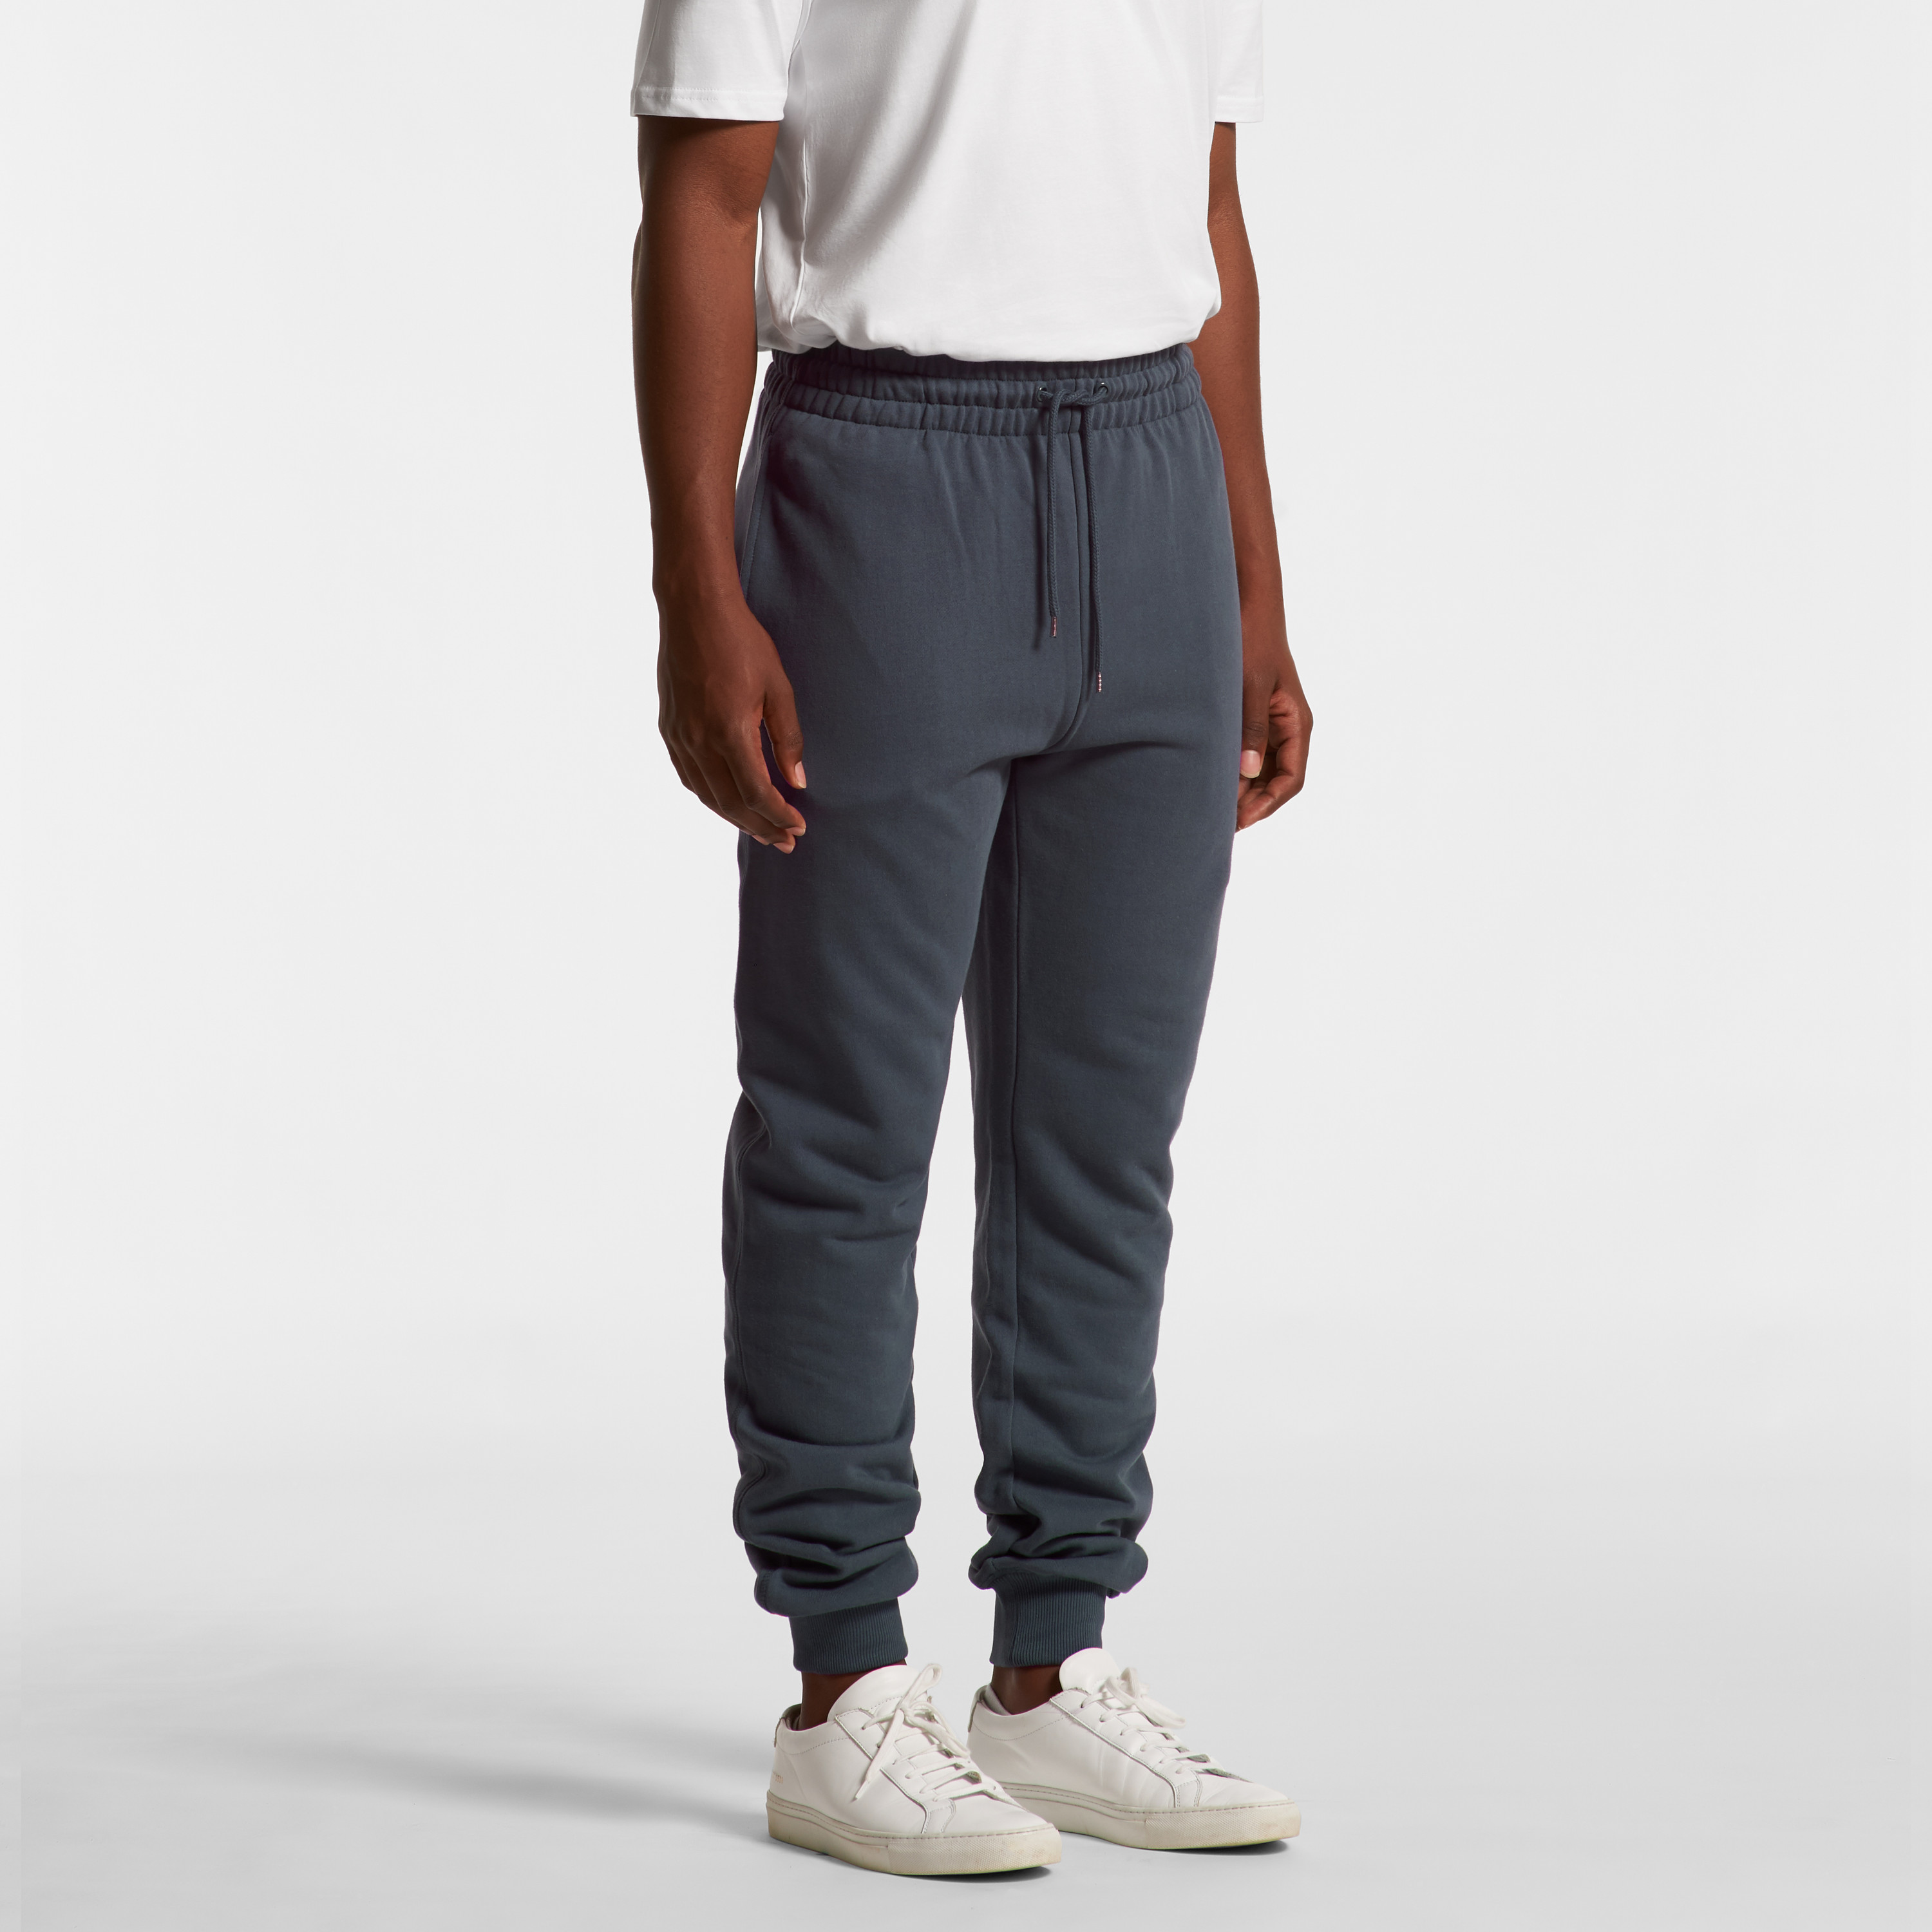 FITINC Premium Airforce Track Pant for Men | Anti Microbial | Superdry